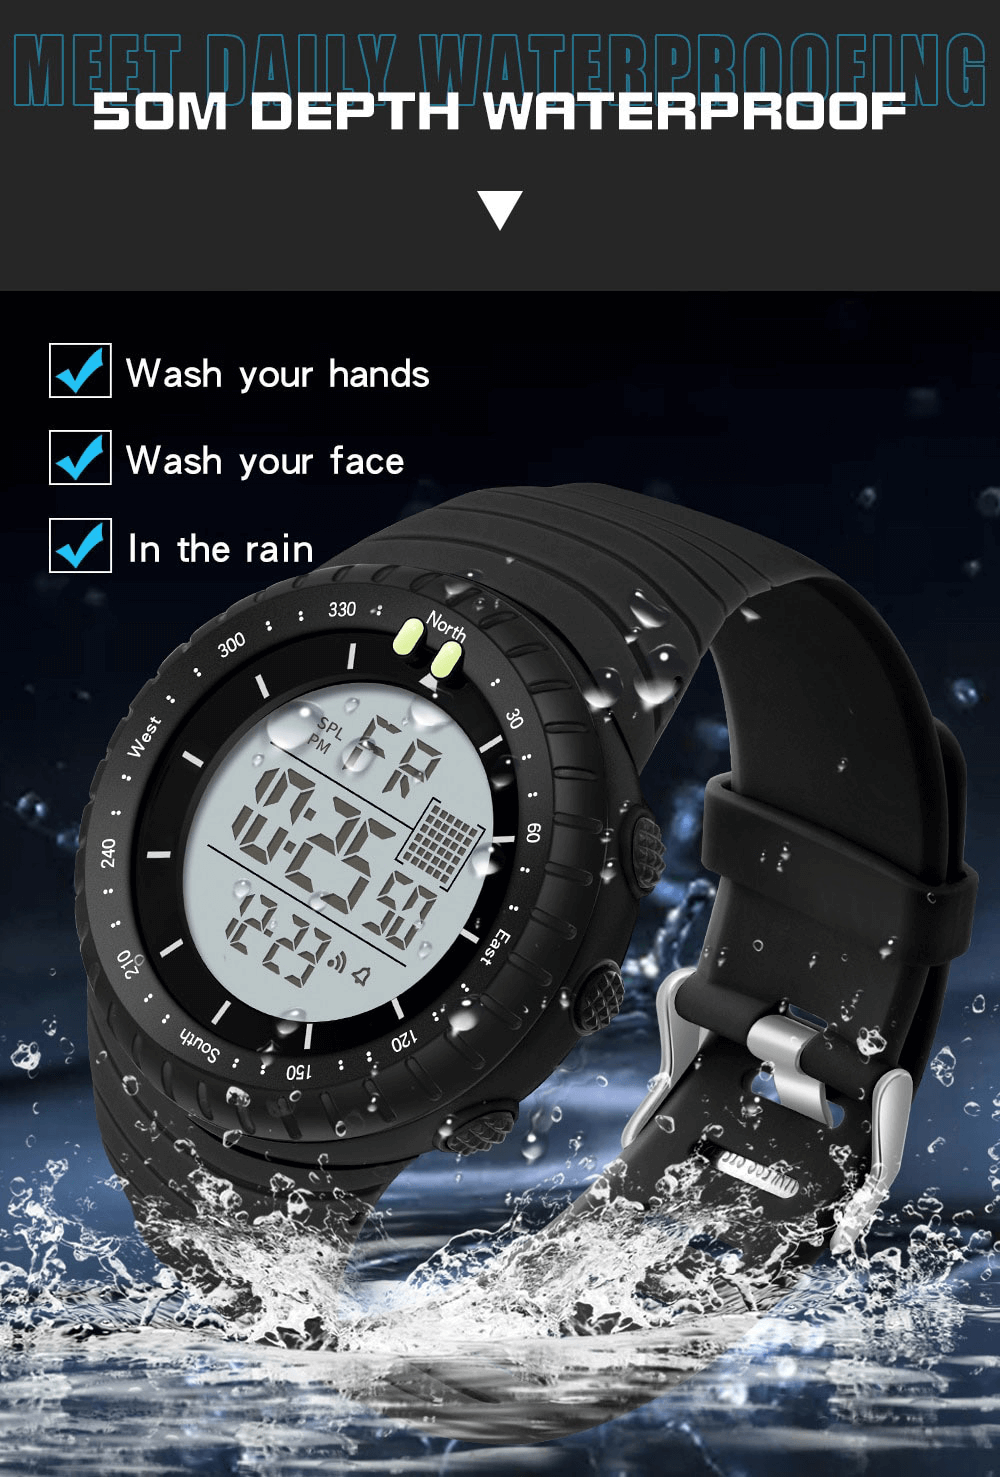 Outdoor Sports Digital Watch With Large Screen / Fashion Wristwatch - SF1313